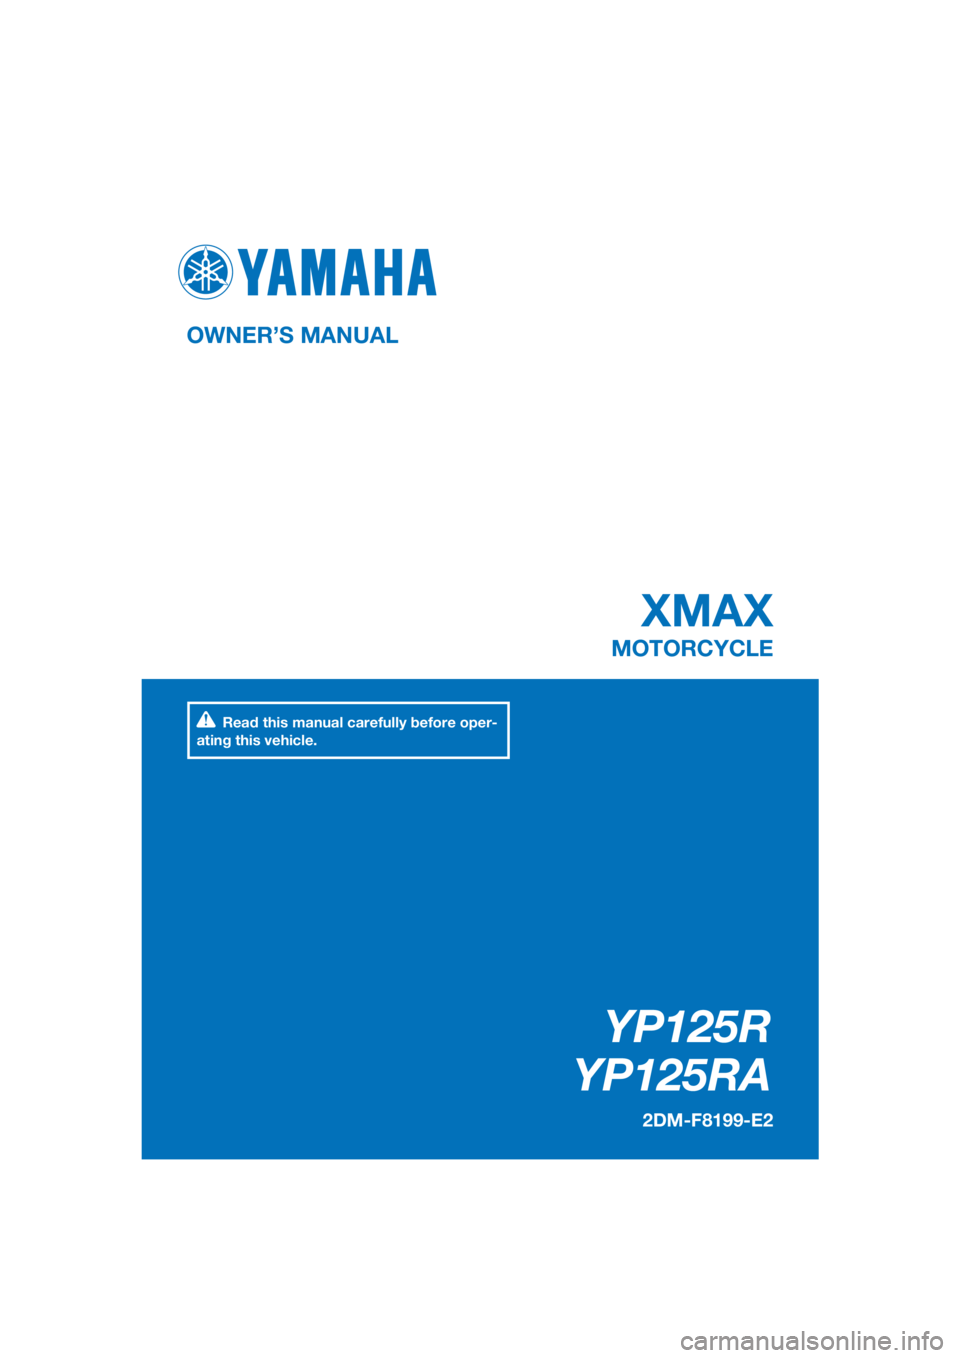 YAMAHA XMAX 125 2016  Owners Manual PANTONE285C
YP125R
YP125RA
XMAX
OWNER’S MANUAL
2DM-F8199-E2
MOTORCYCLE
[English  (E)]
Read this manual carefully before oper-
ating this vehicle. 